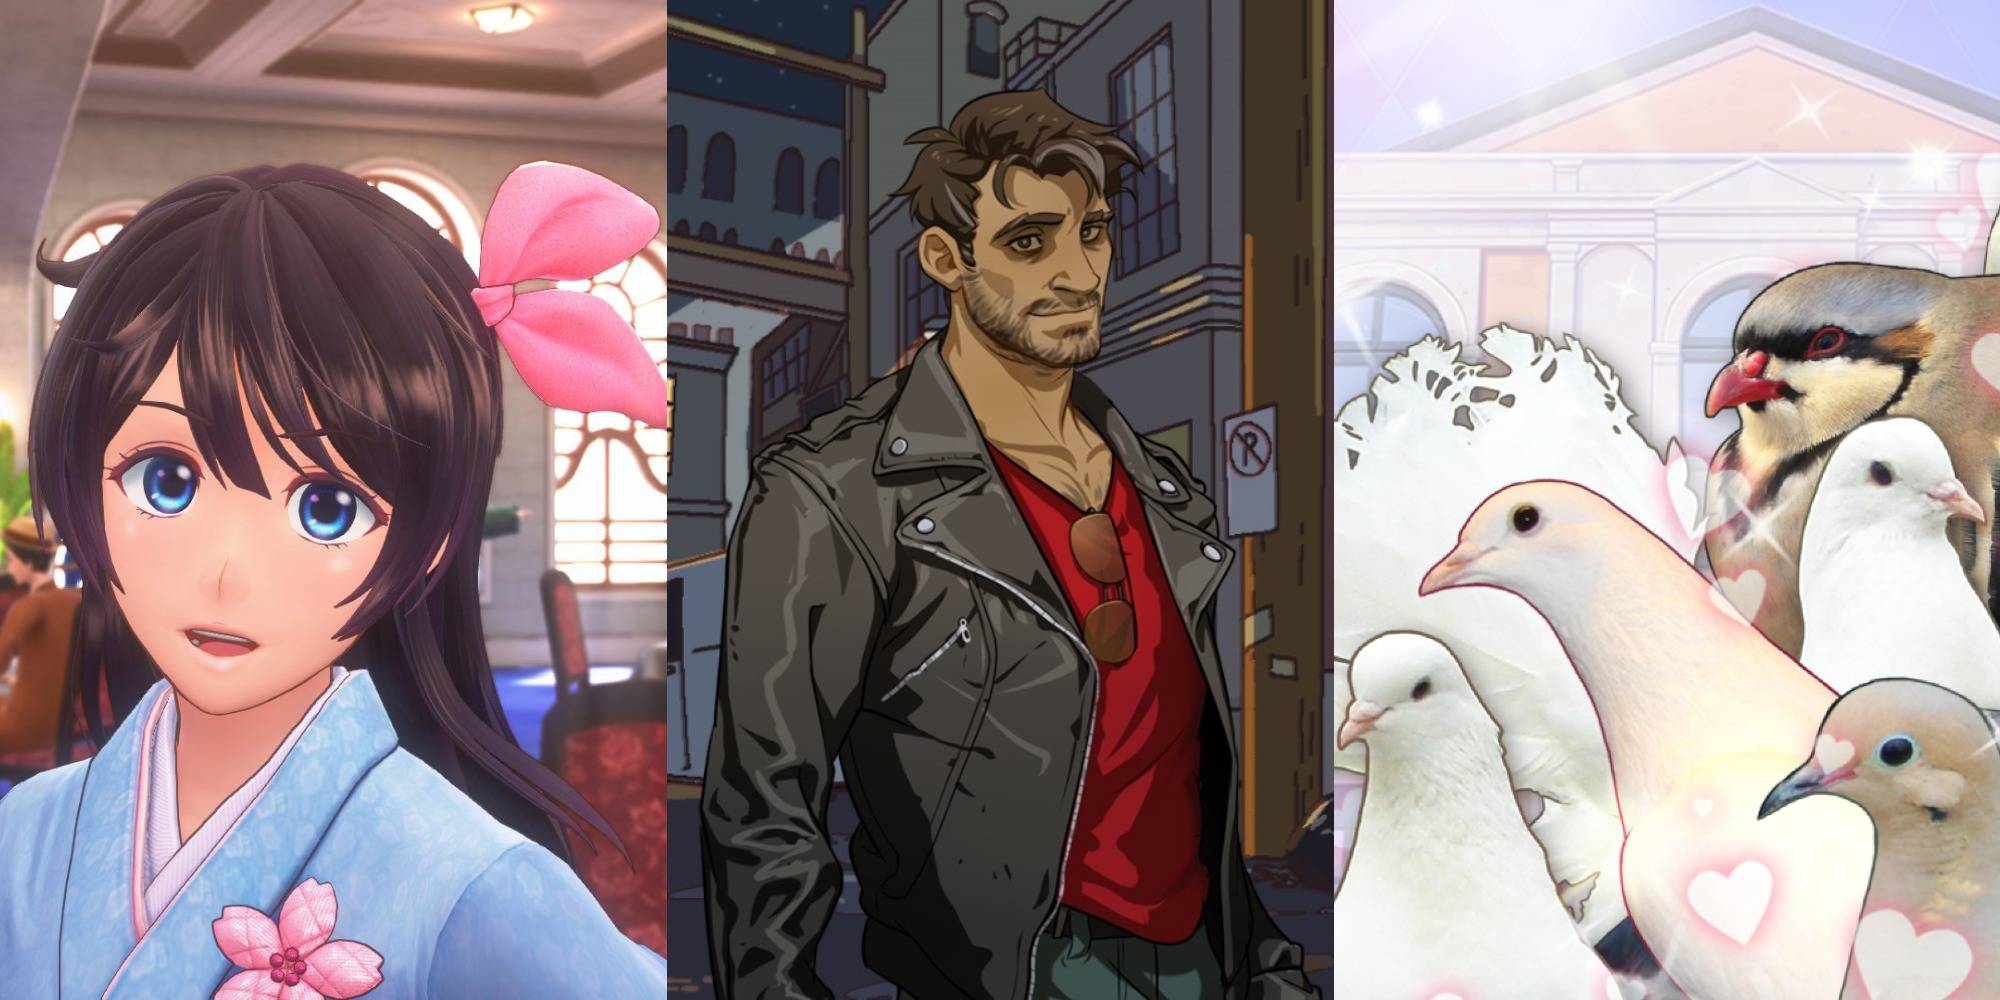 Adult dating sims